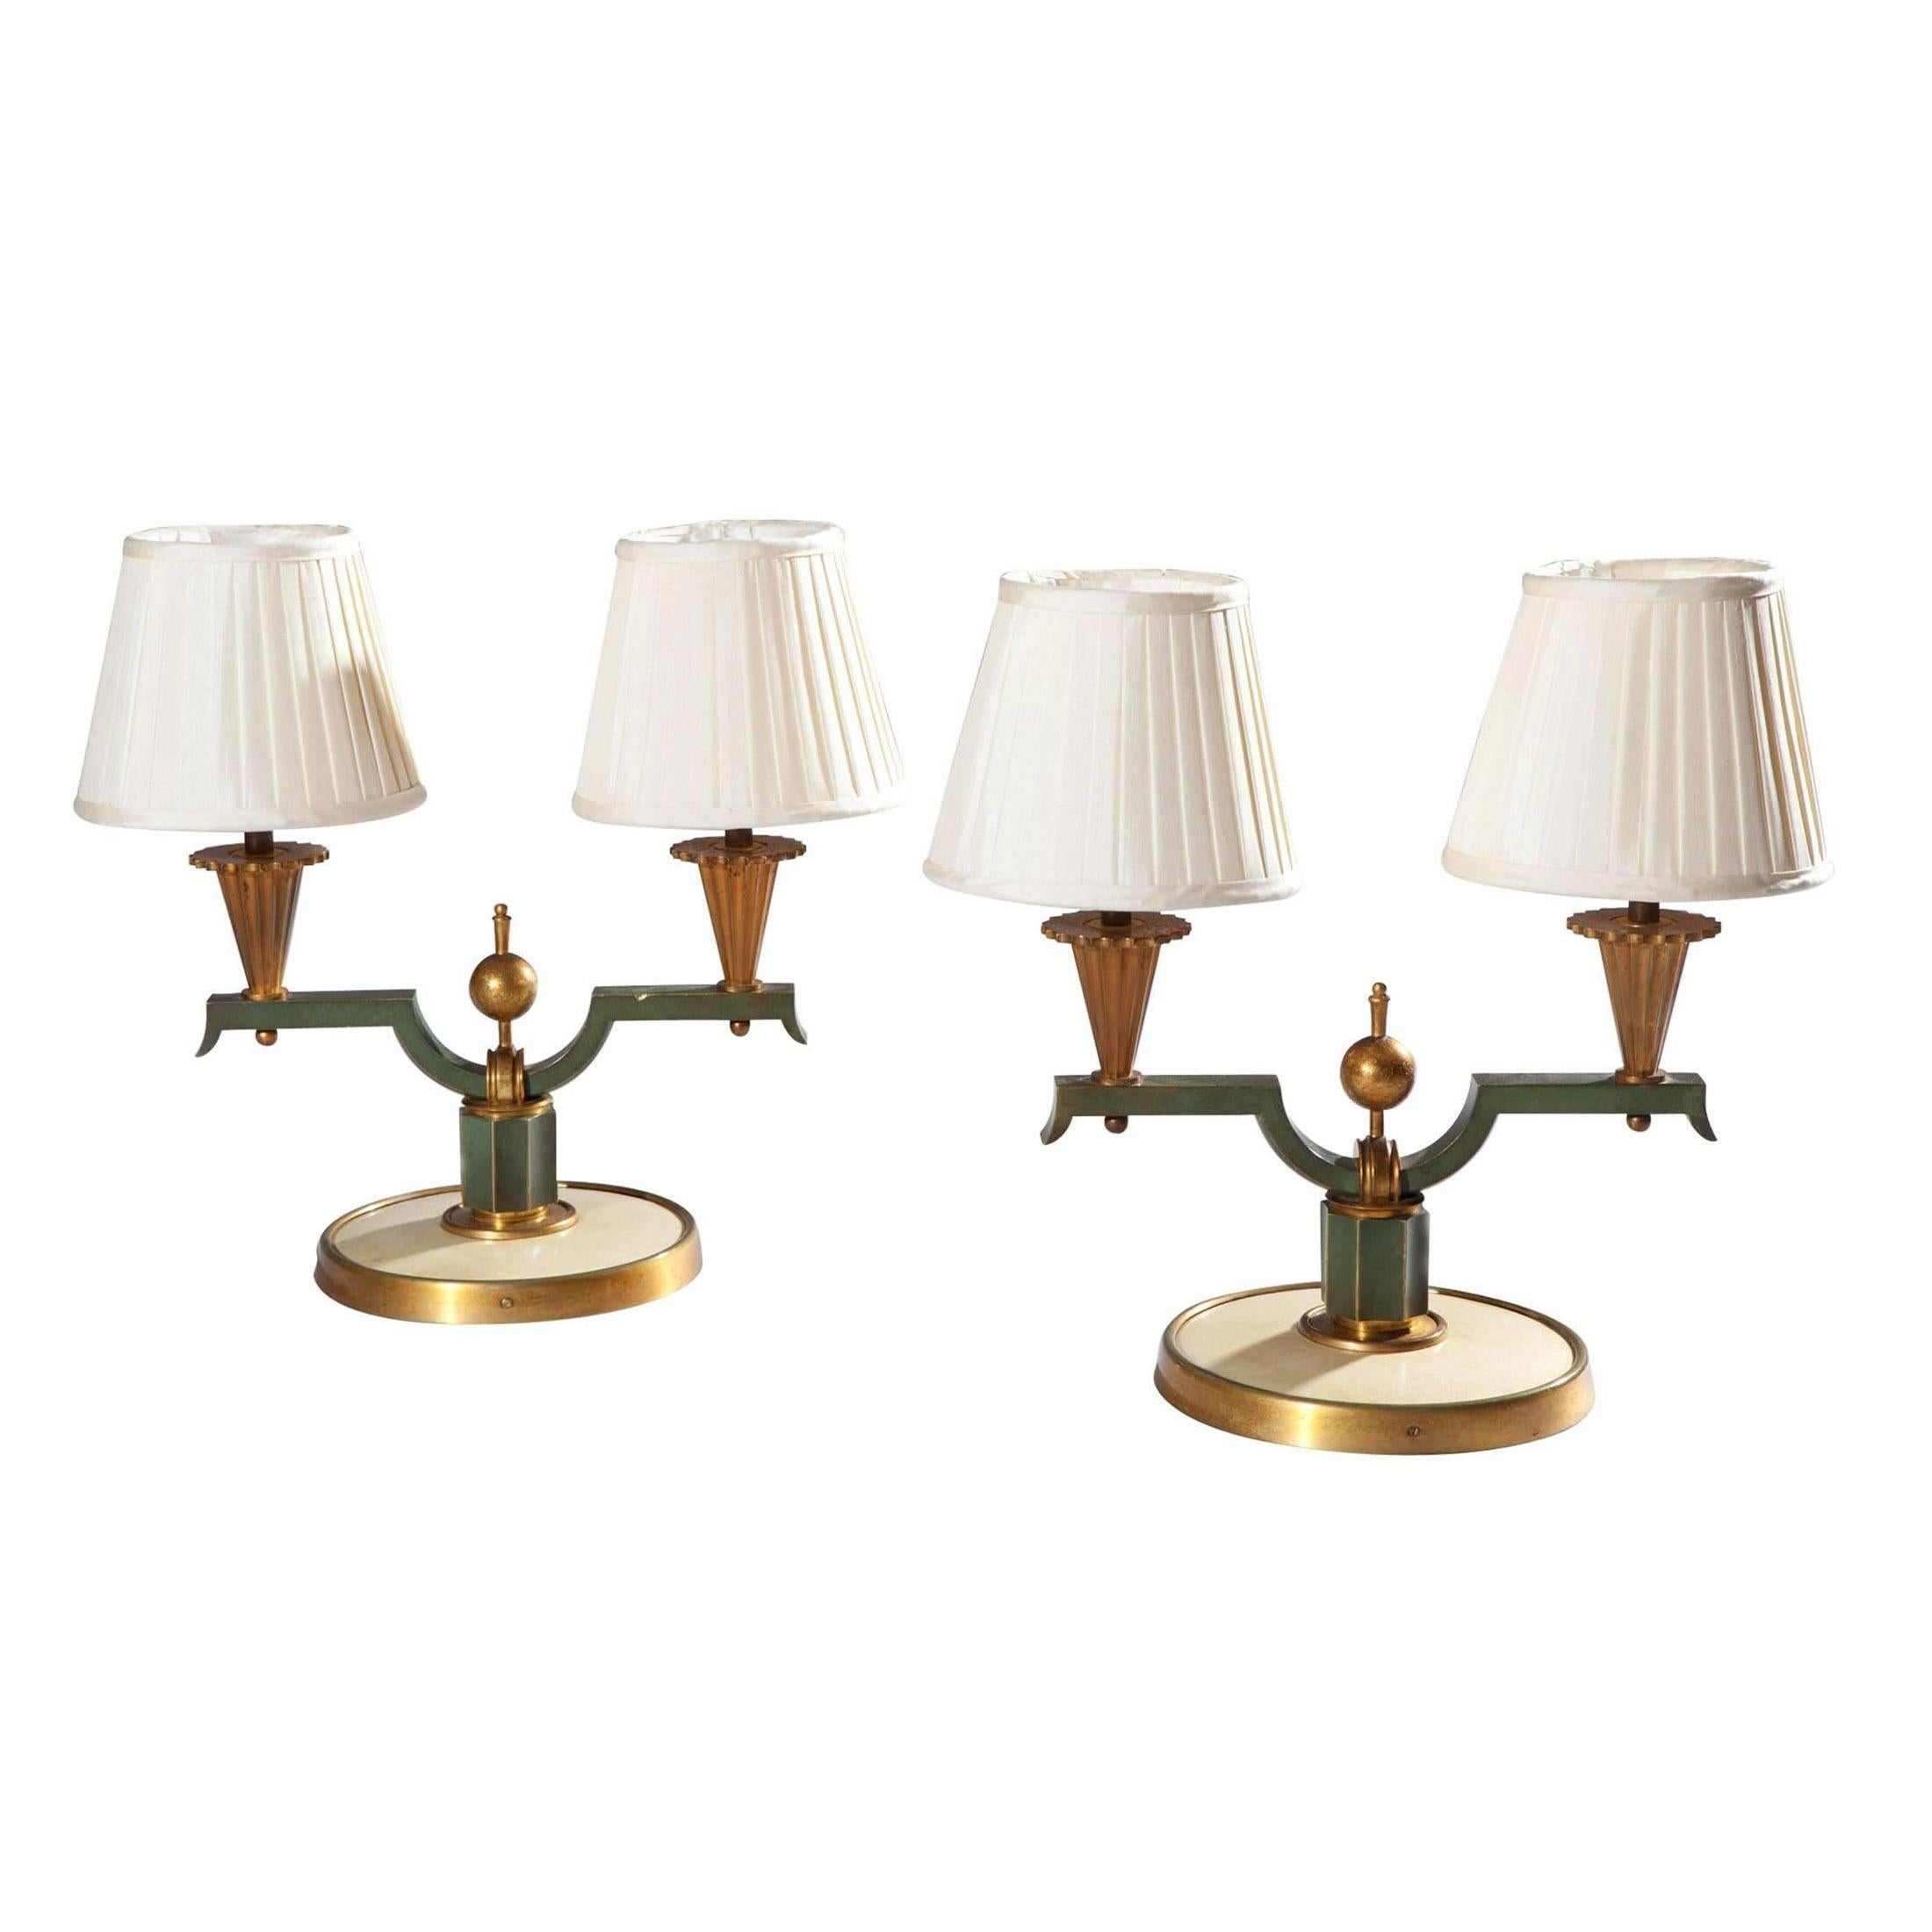 20th Century Pair of Art Deco French Patinated and Gilded Bronze Table Lamps Genet et Michon For Sale